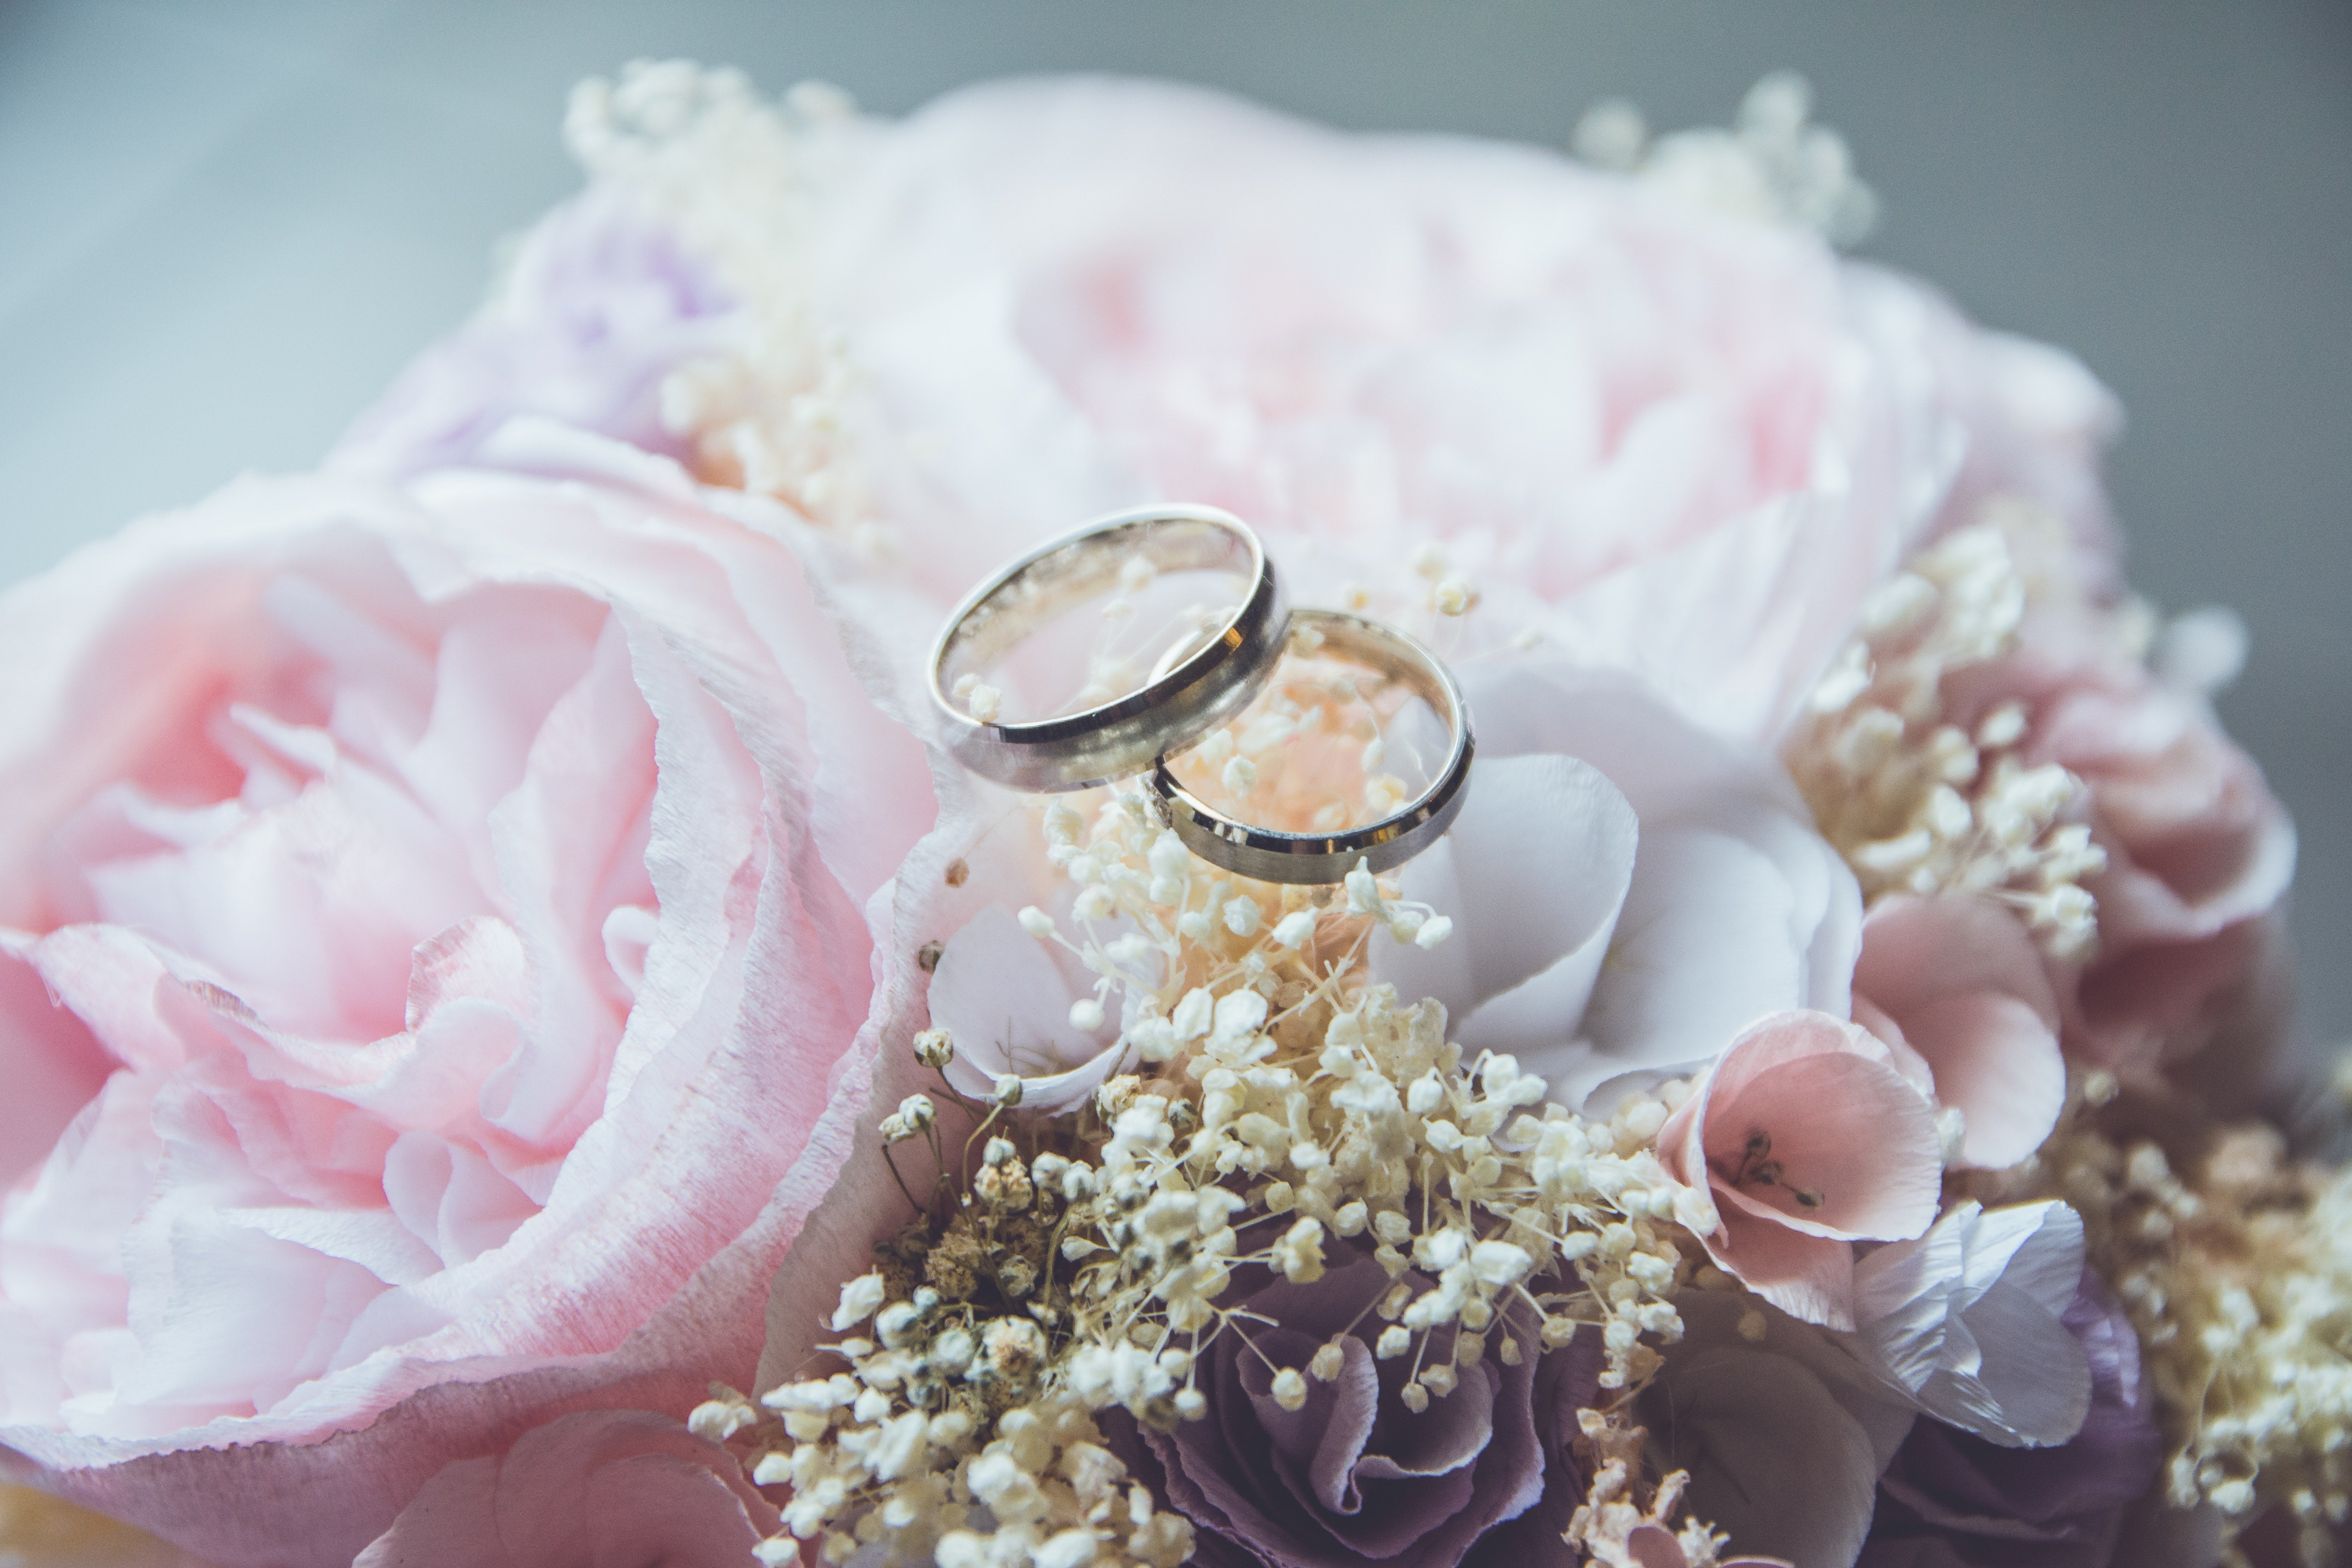 white gold wedding bands on top of a small bouquet of flowers